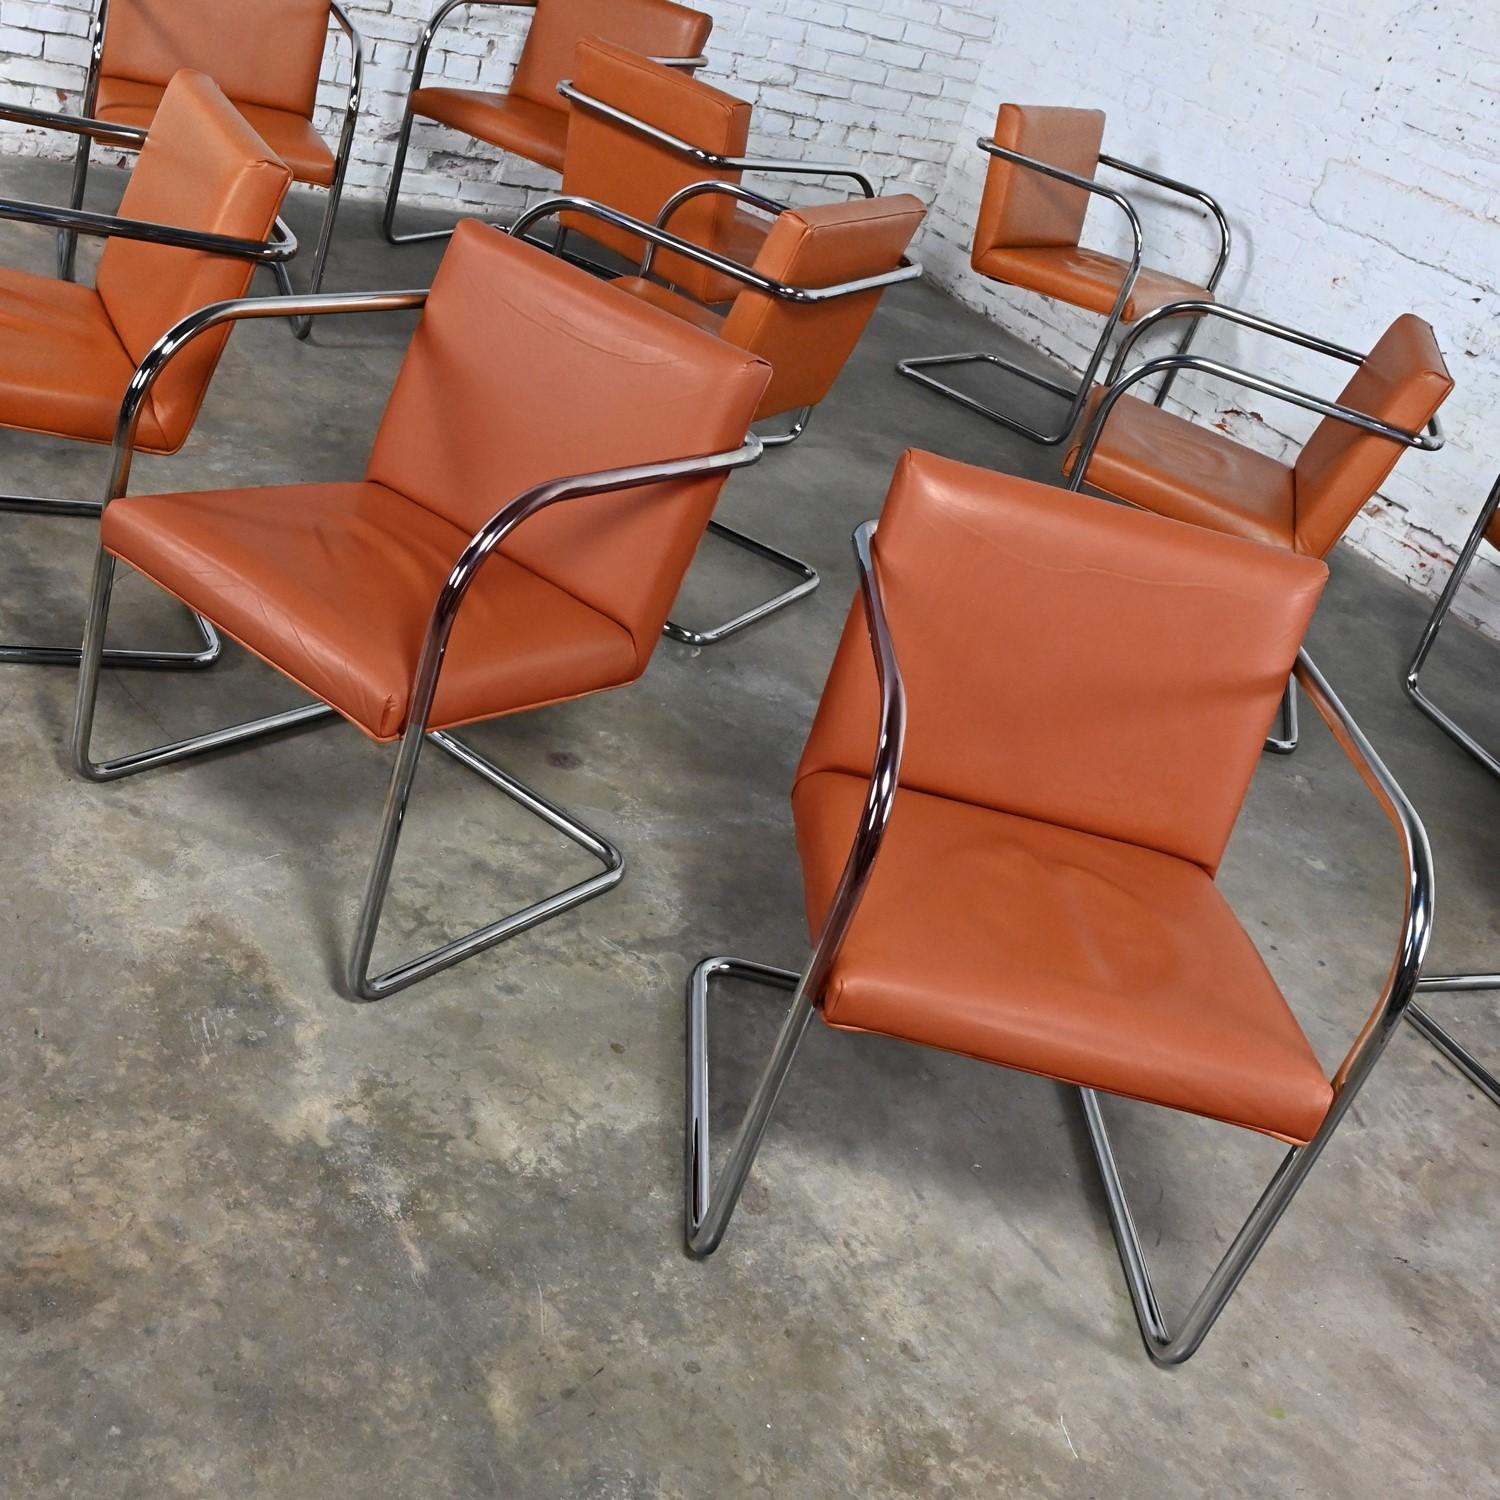 Thonet Bauhaus Brno Style Chairs Chrome & Cognac Leather Cantilever Set of 12  For Sale 1